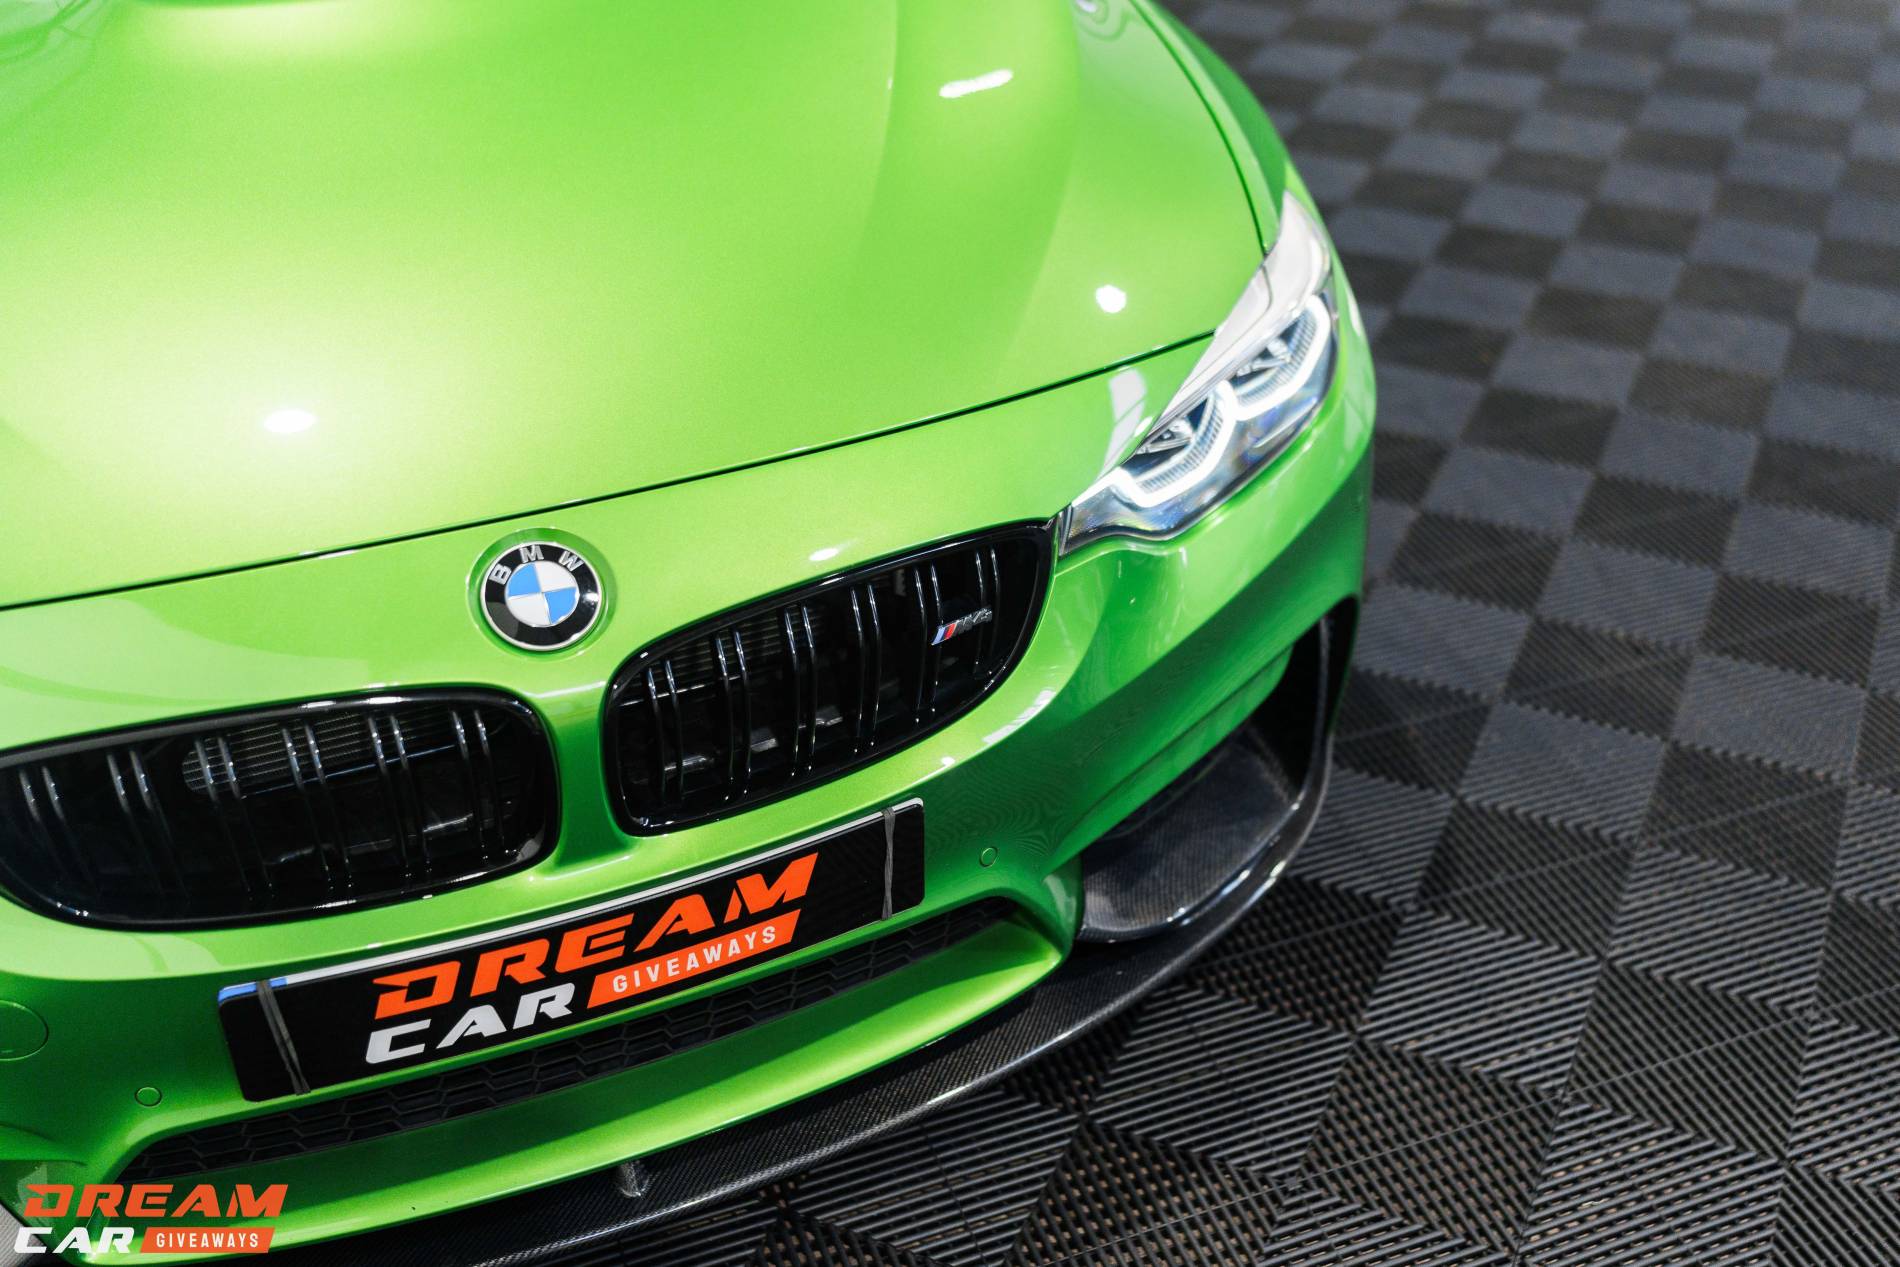 Win this BMW M4 Competition & £1,000 or £30,000 Tax Free